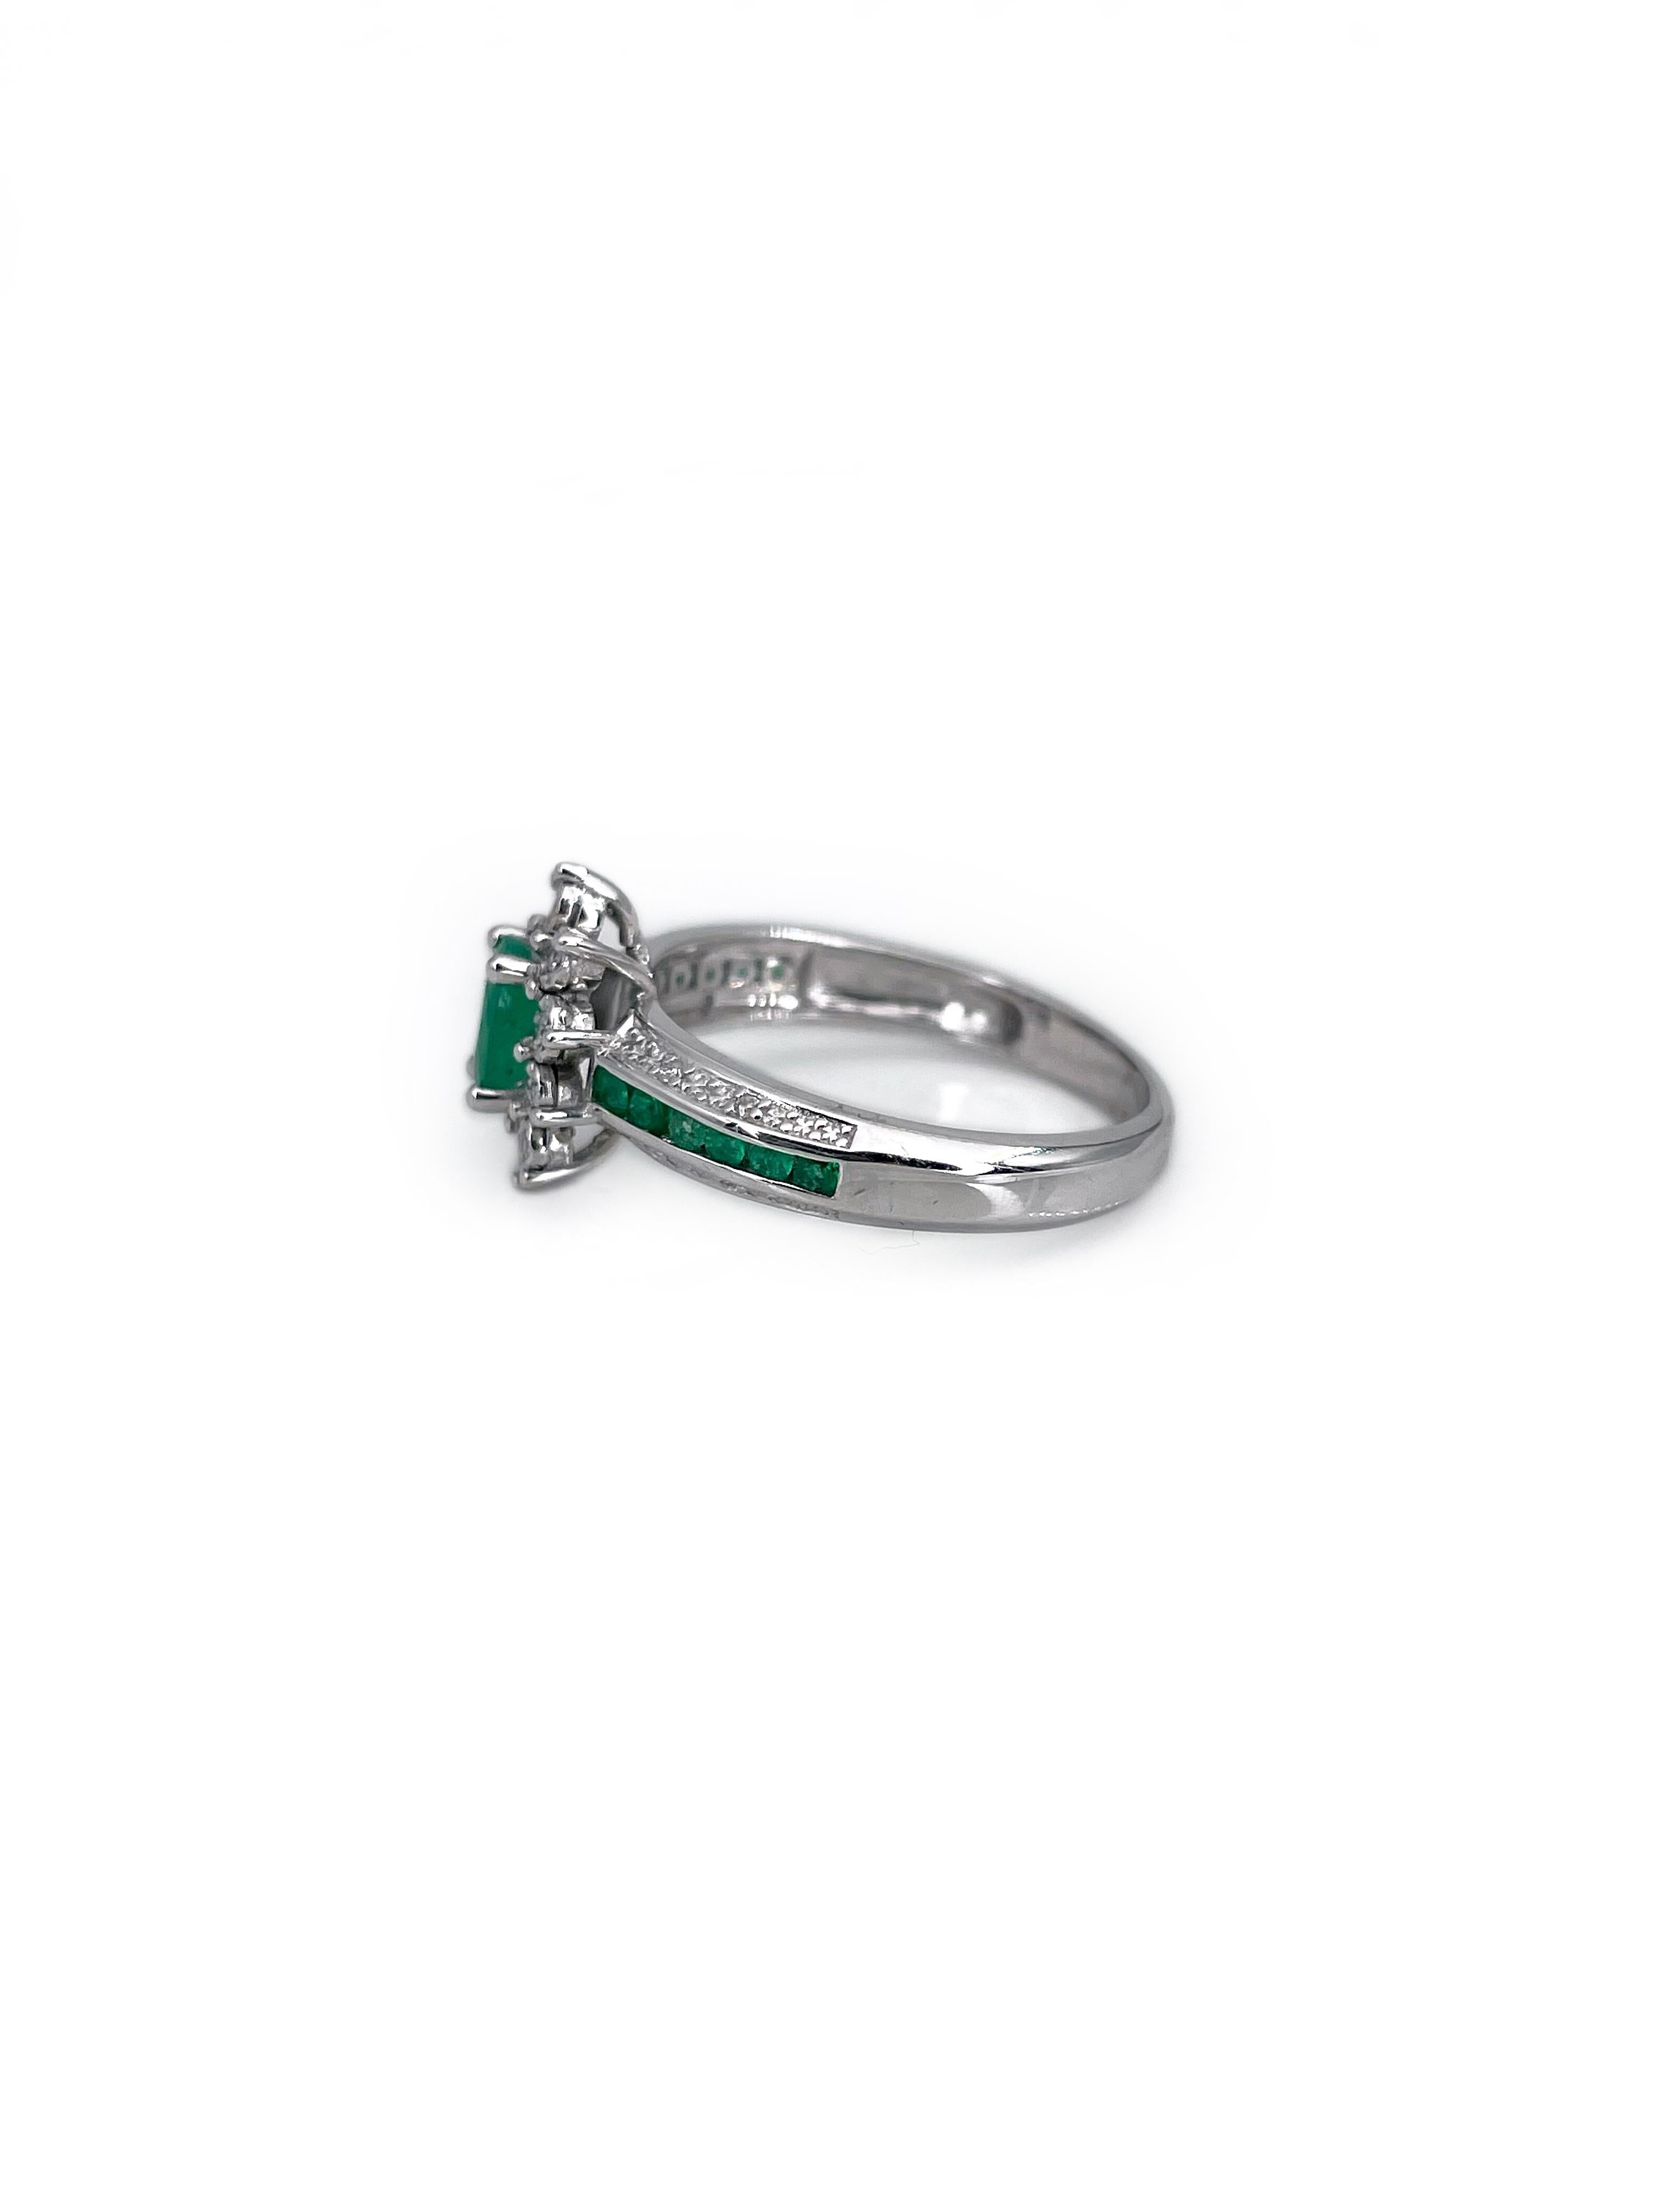 This is a vintage cluster ring crafted in 18K white gold. The piece features:
- 13pcs. emeralds: round and oval cut, 0.38ct, vslbG 5/4, P1-P2
- 14pcs., diamonds: brilliant cut, 0.07ct, RW+/RW, SI

Weight: 4.14g 
Size: 17.75 (US 7.5)

IMPORTANT: